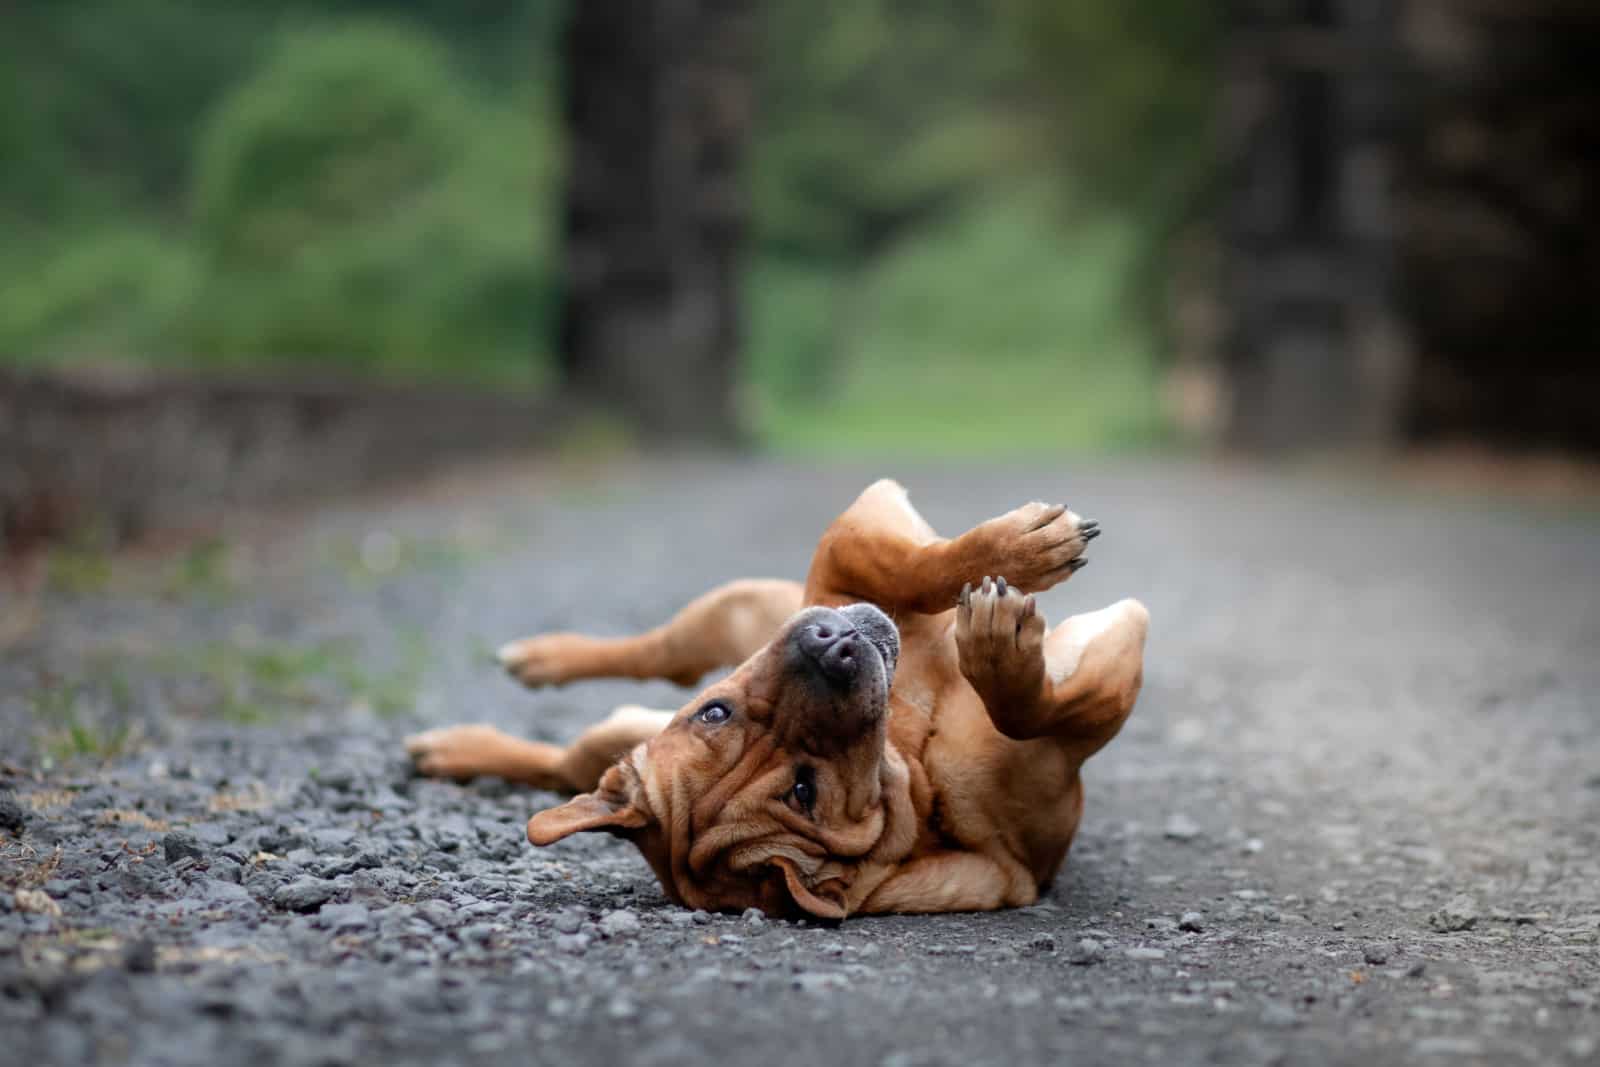 Shar Pei mix plays in nature